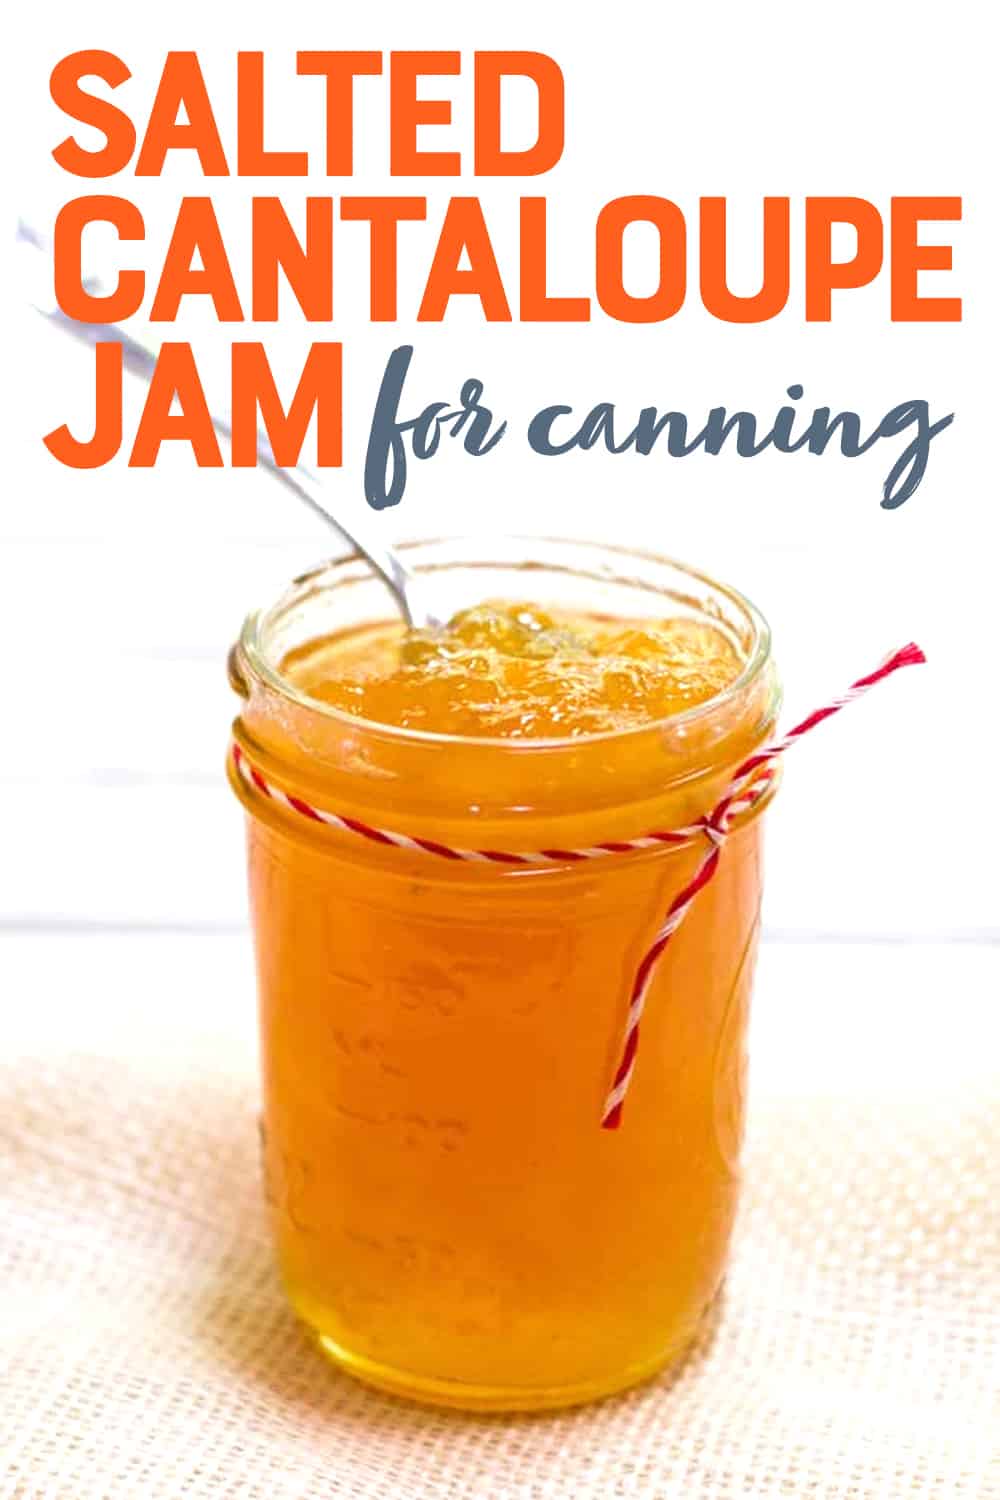 Close-up of pint-sized canning jar full of salted cantaloupe jam. A text overlay reads, "Salted Cantaloupe Jam for Canning."